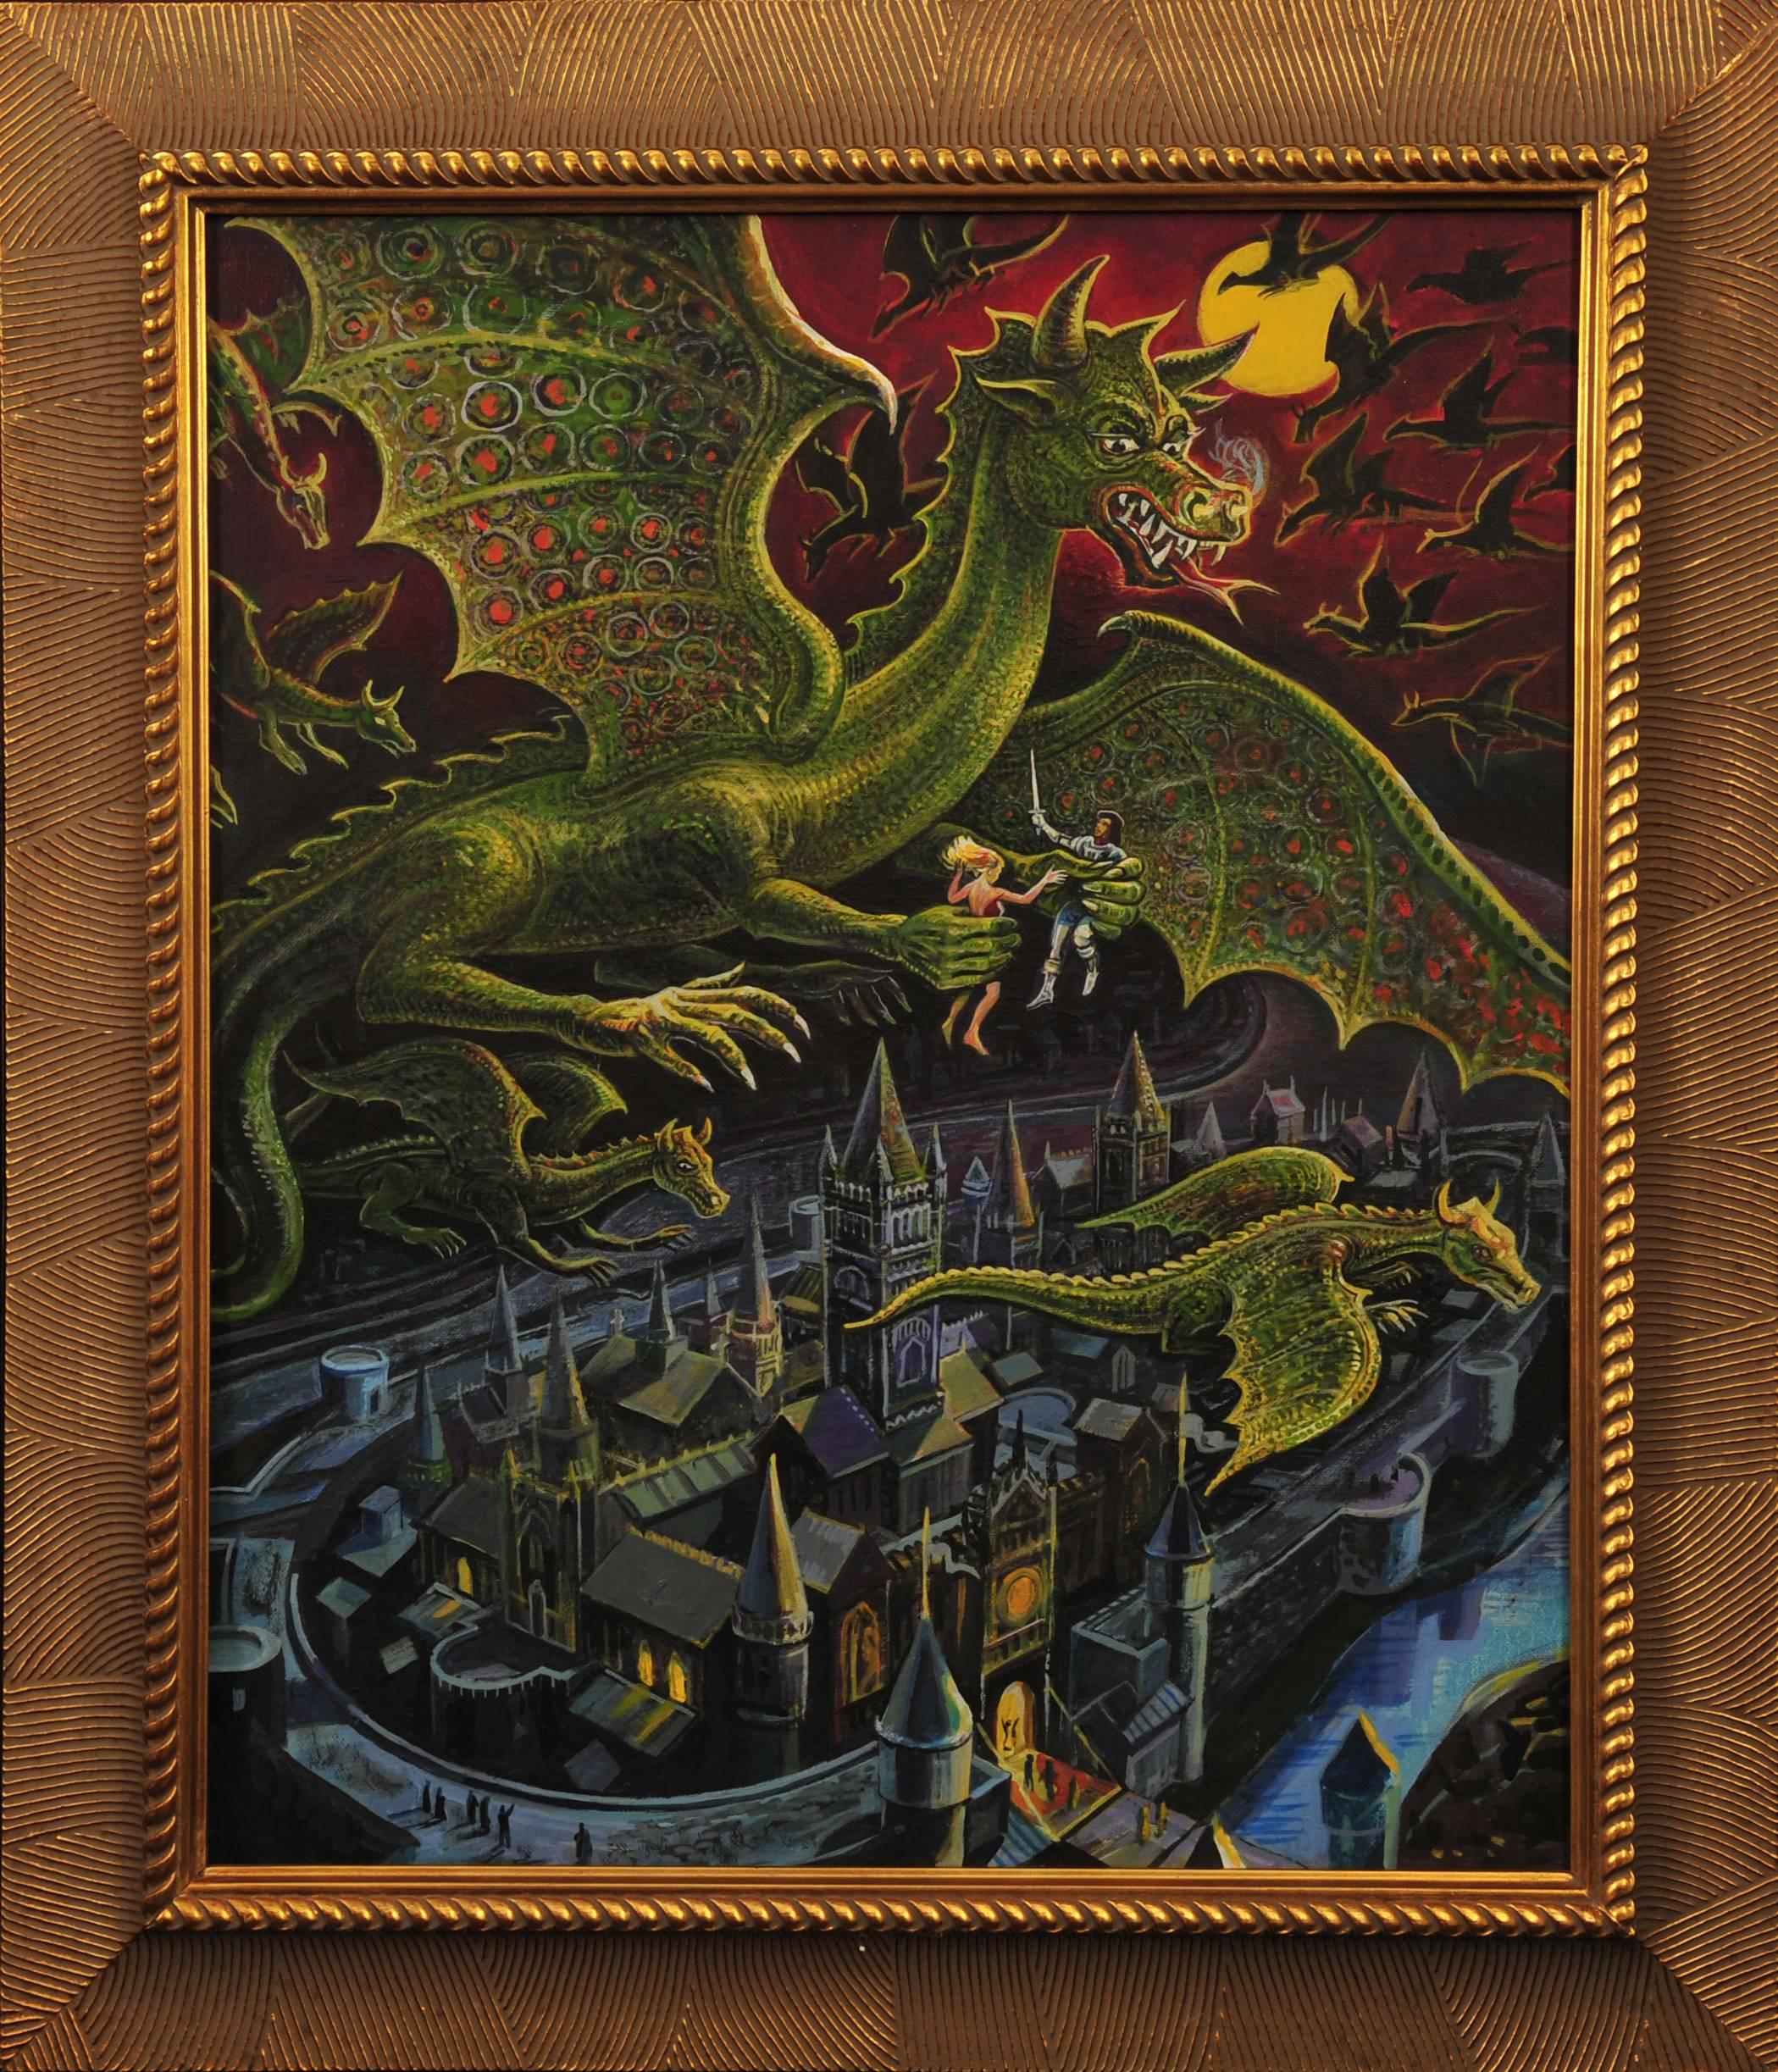 Invasion of the Dragons - Painting by Charles Ellis